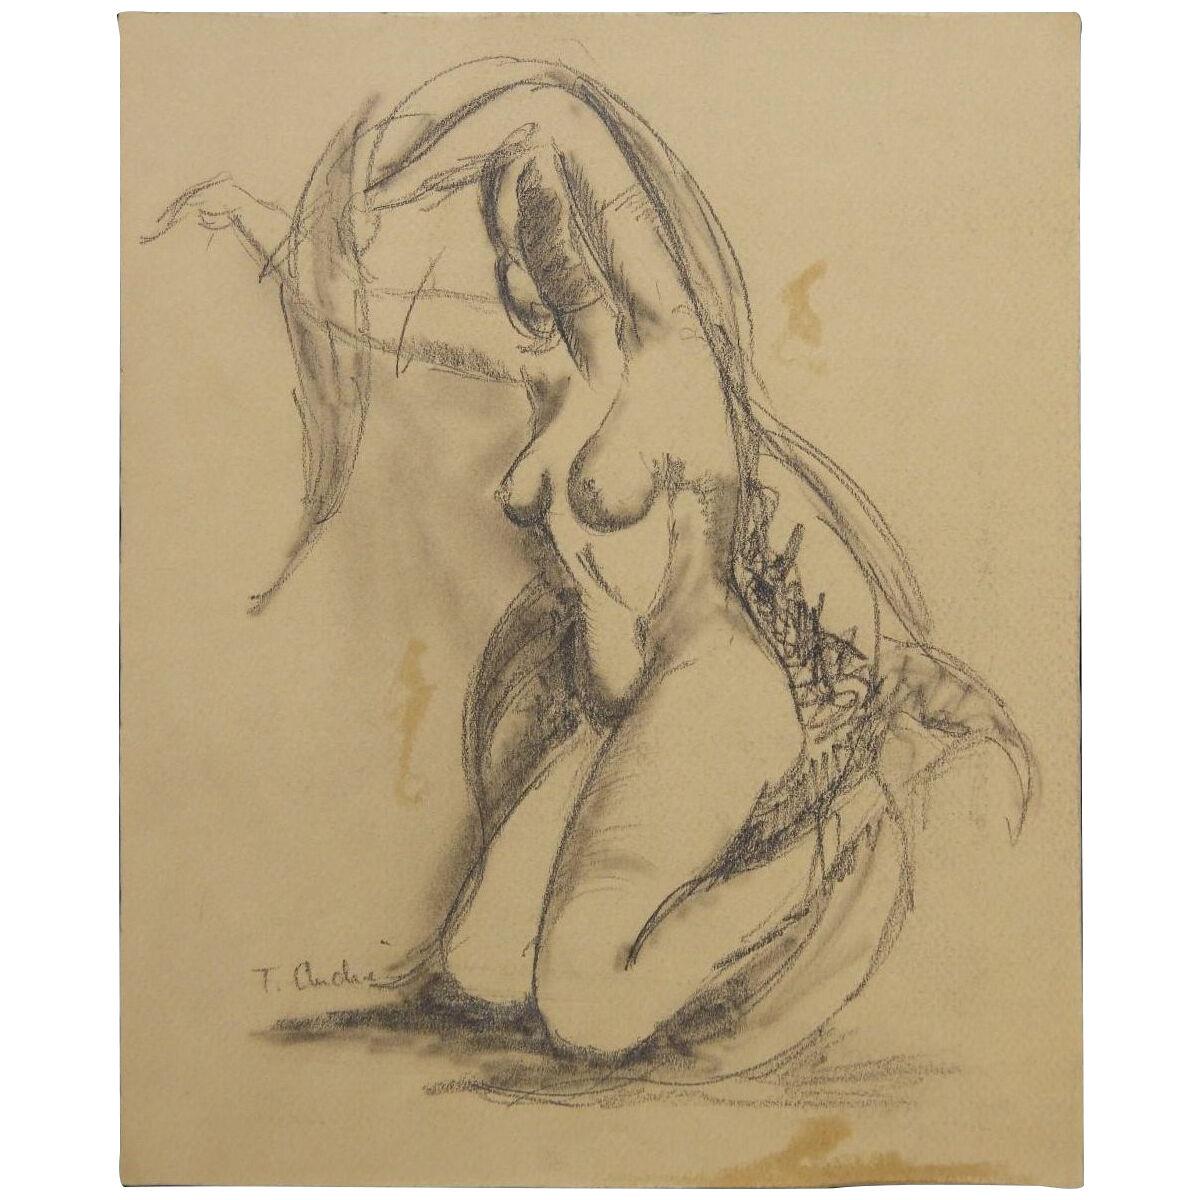 1960s Seated Naturalistic Figurative Nude Study Charcoal on Paper